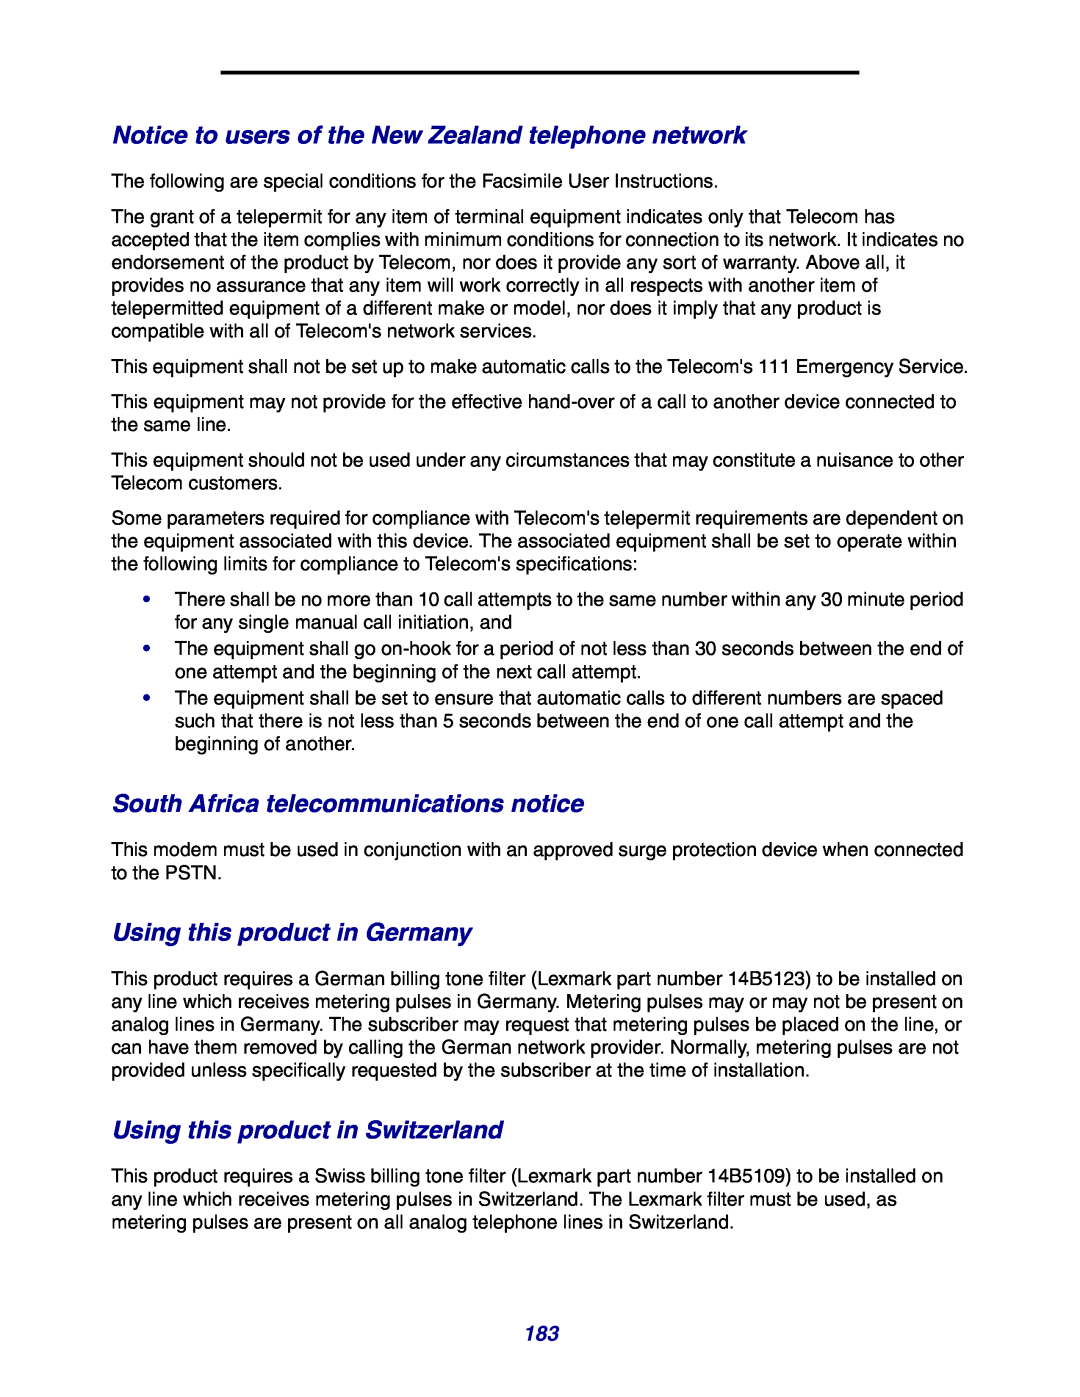 Lexmark X642e manual Notice to users of the New Zealand telephone network, South Africa telecommunications notice 